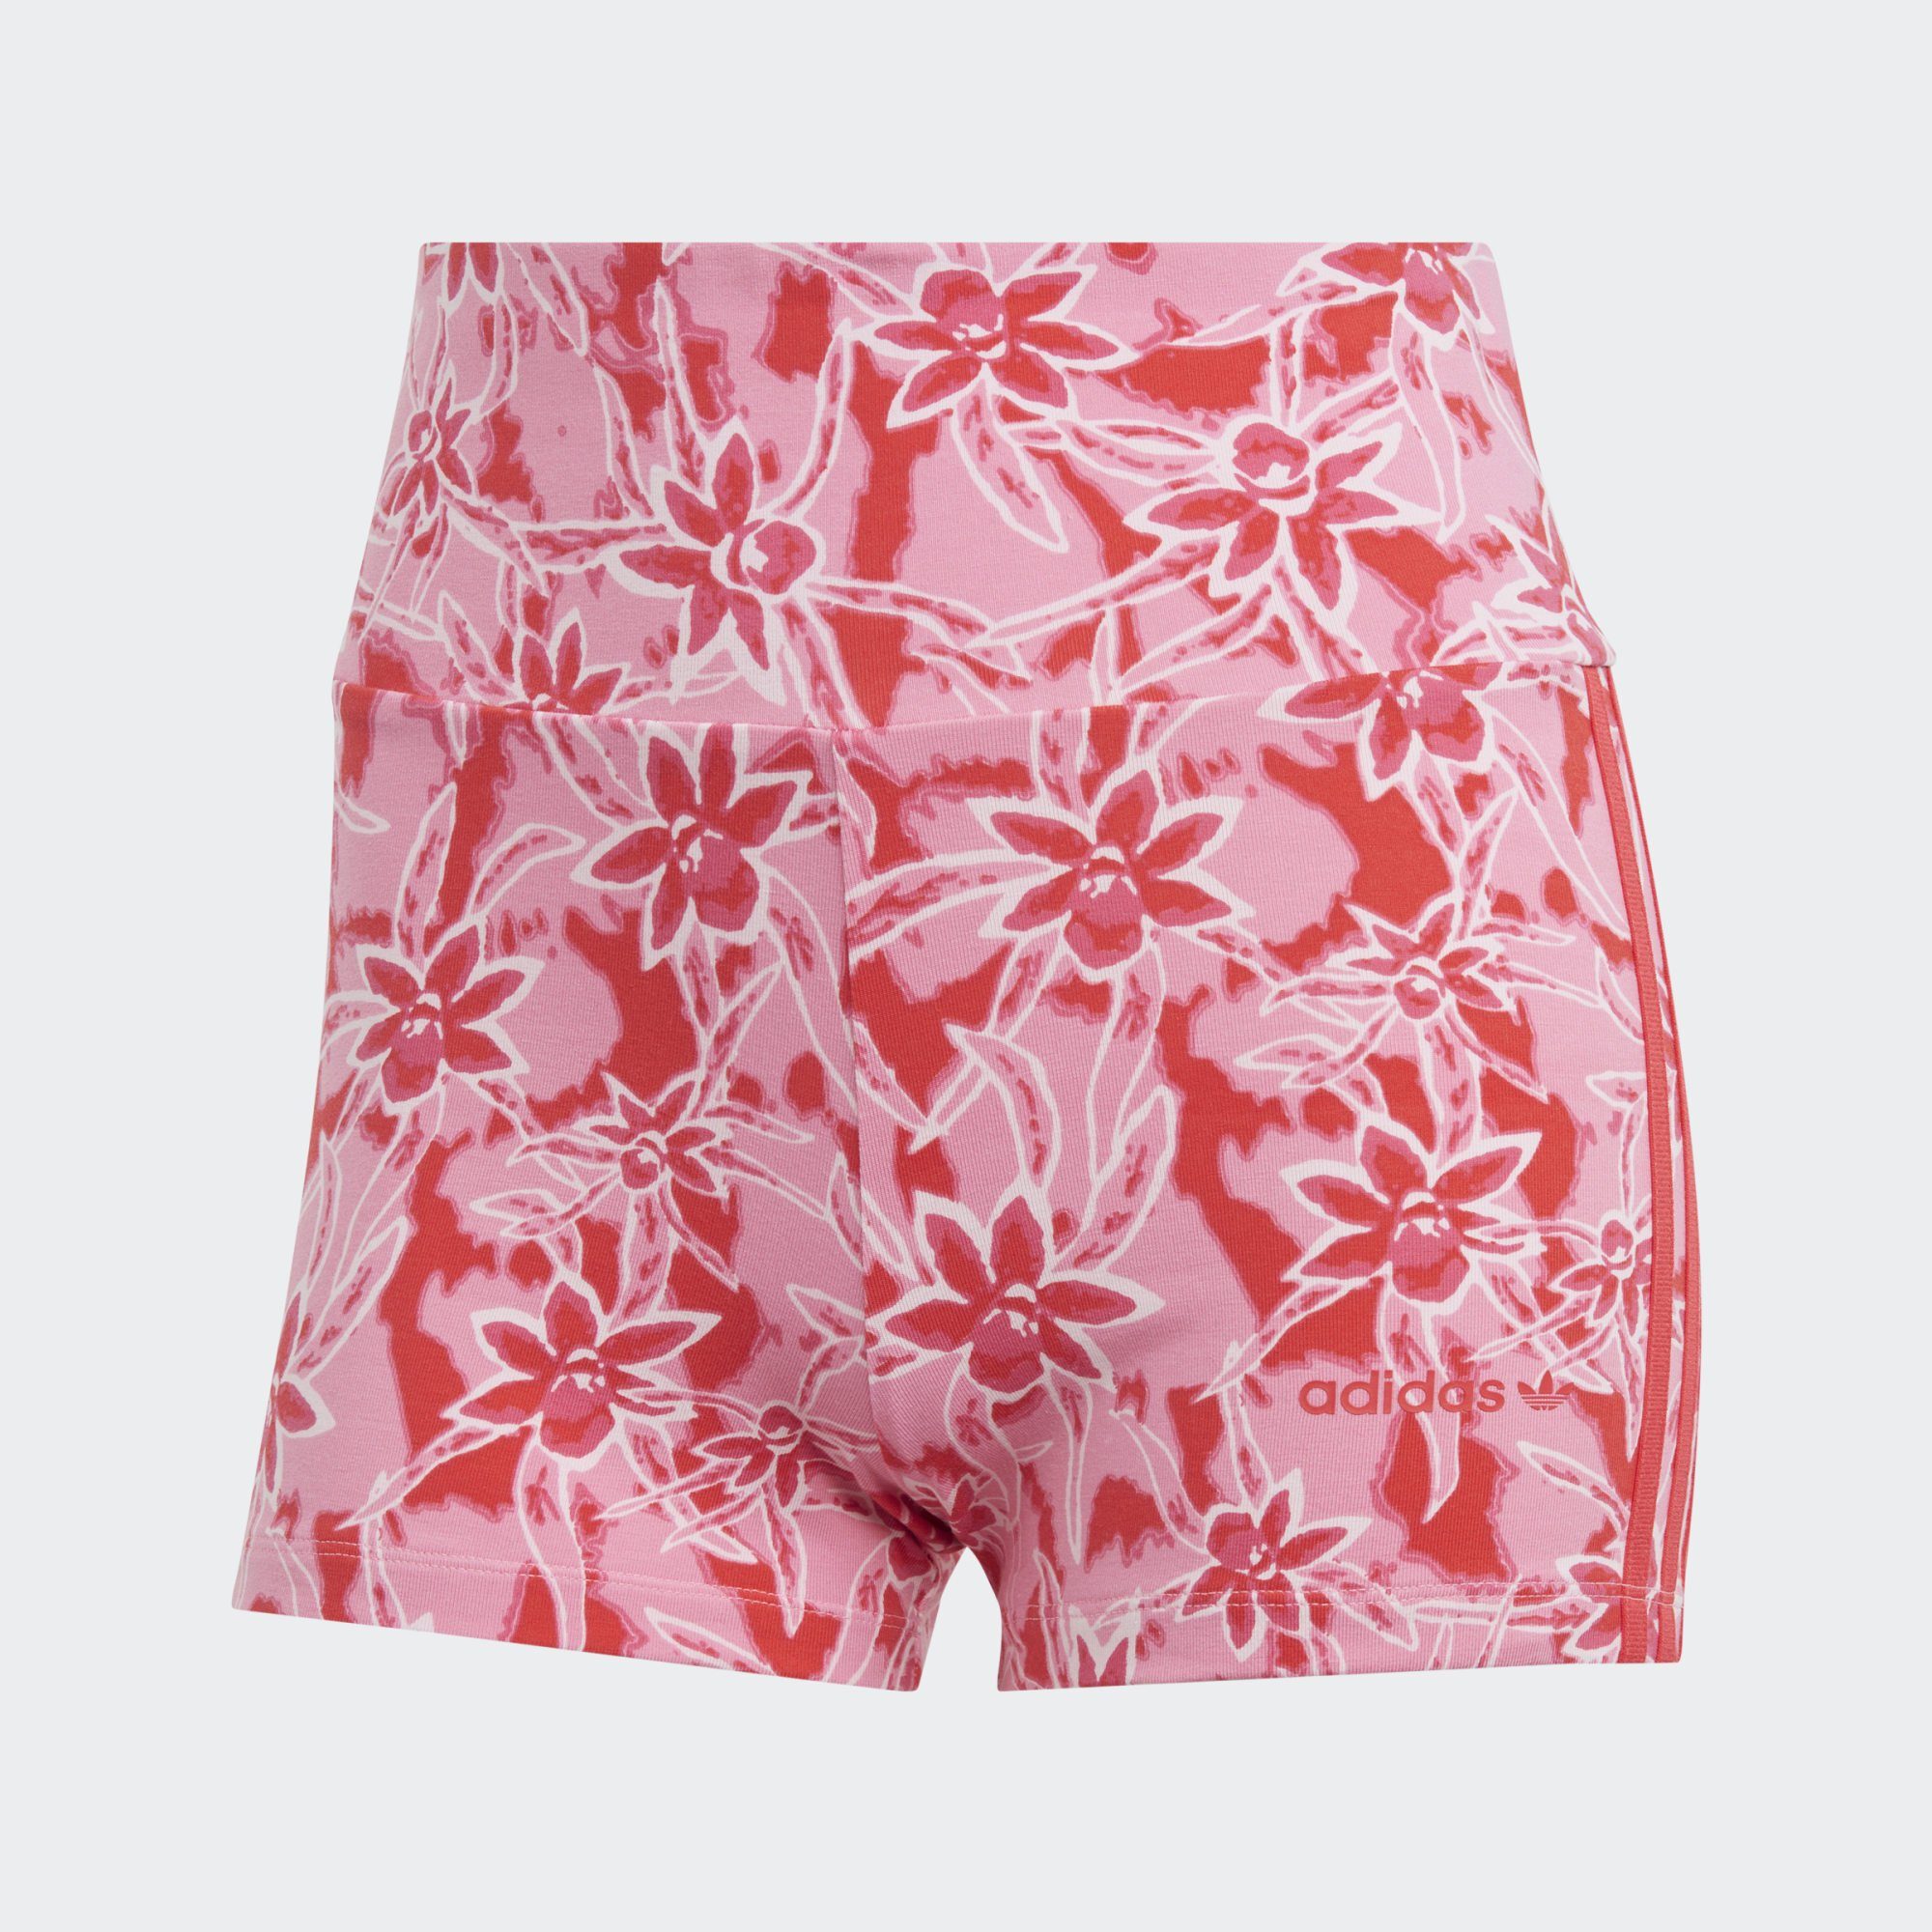 adidas Originals Funktionsshorts Multicolor Clear Pink ALLOVER / SHORTS PRINT